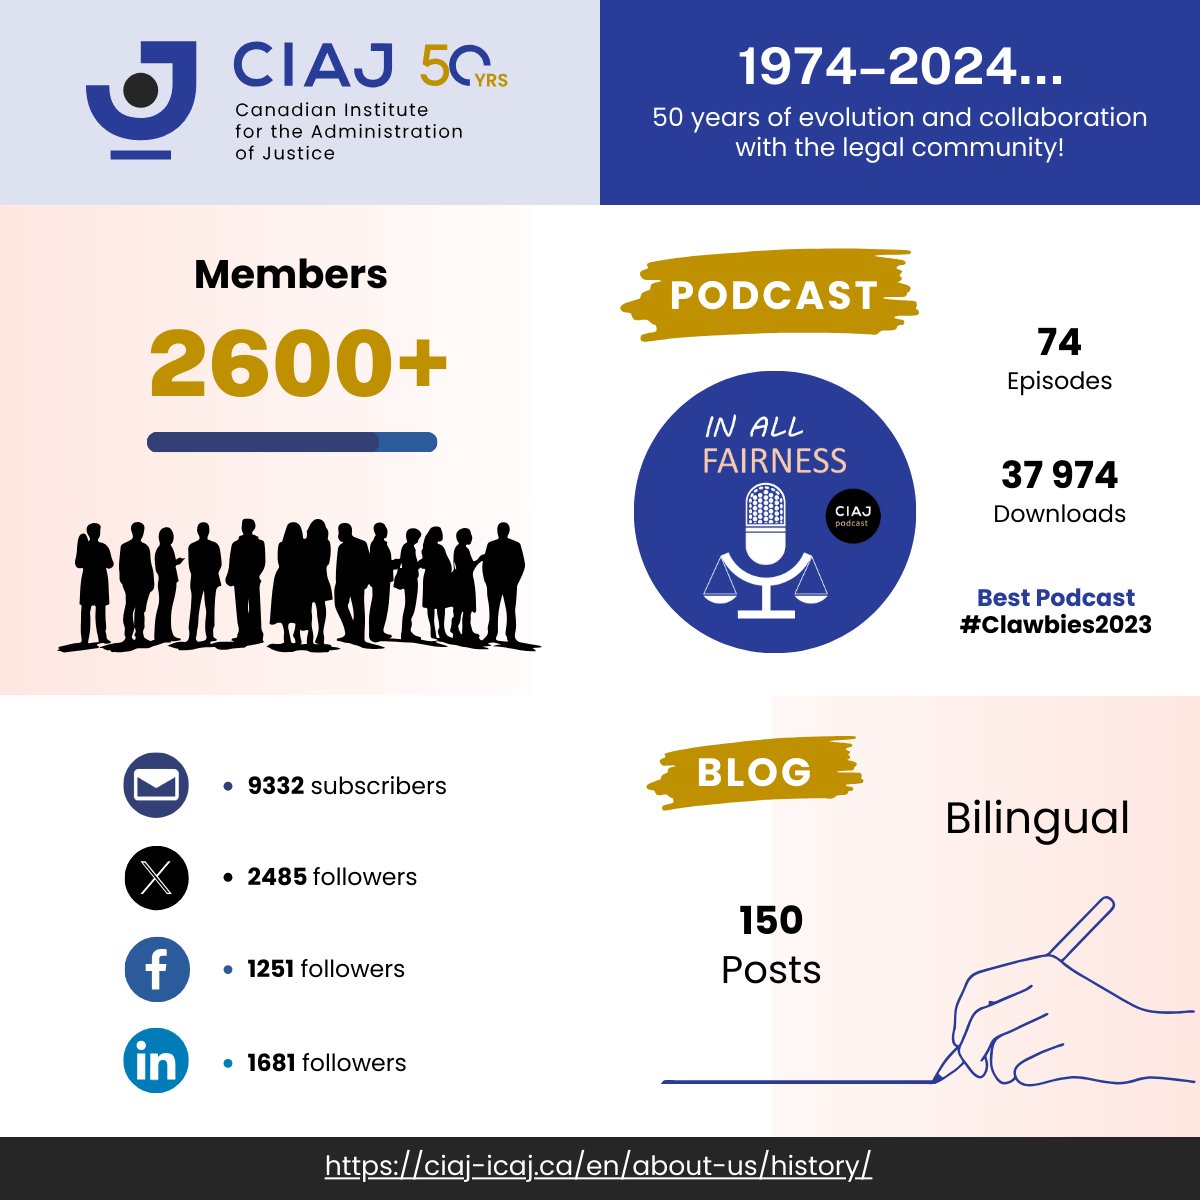 [#CIAJ50yrs🎉] We are proud to celebrate 50 years of history and evolution with the legal community. Here are a few stats as of today 📈 & the 1974-2024 timeline: ciaj-icaj.ca/en/about-us/hi…